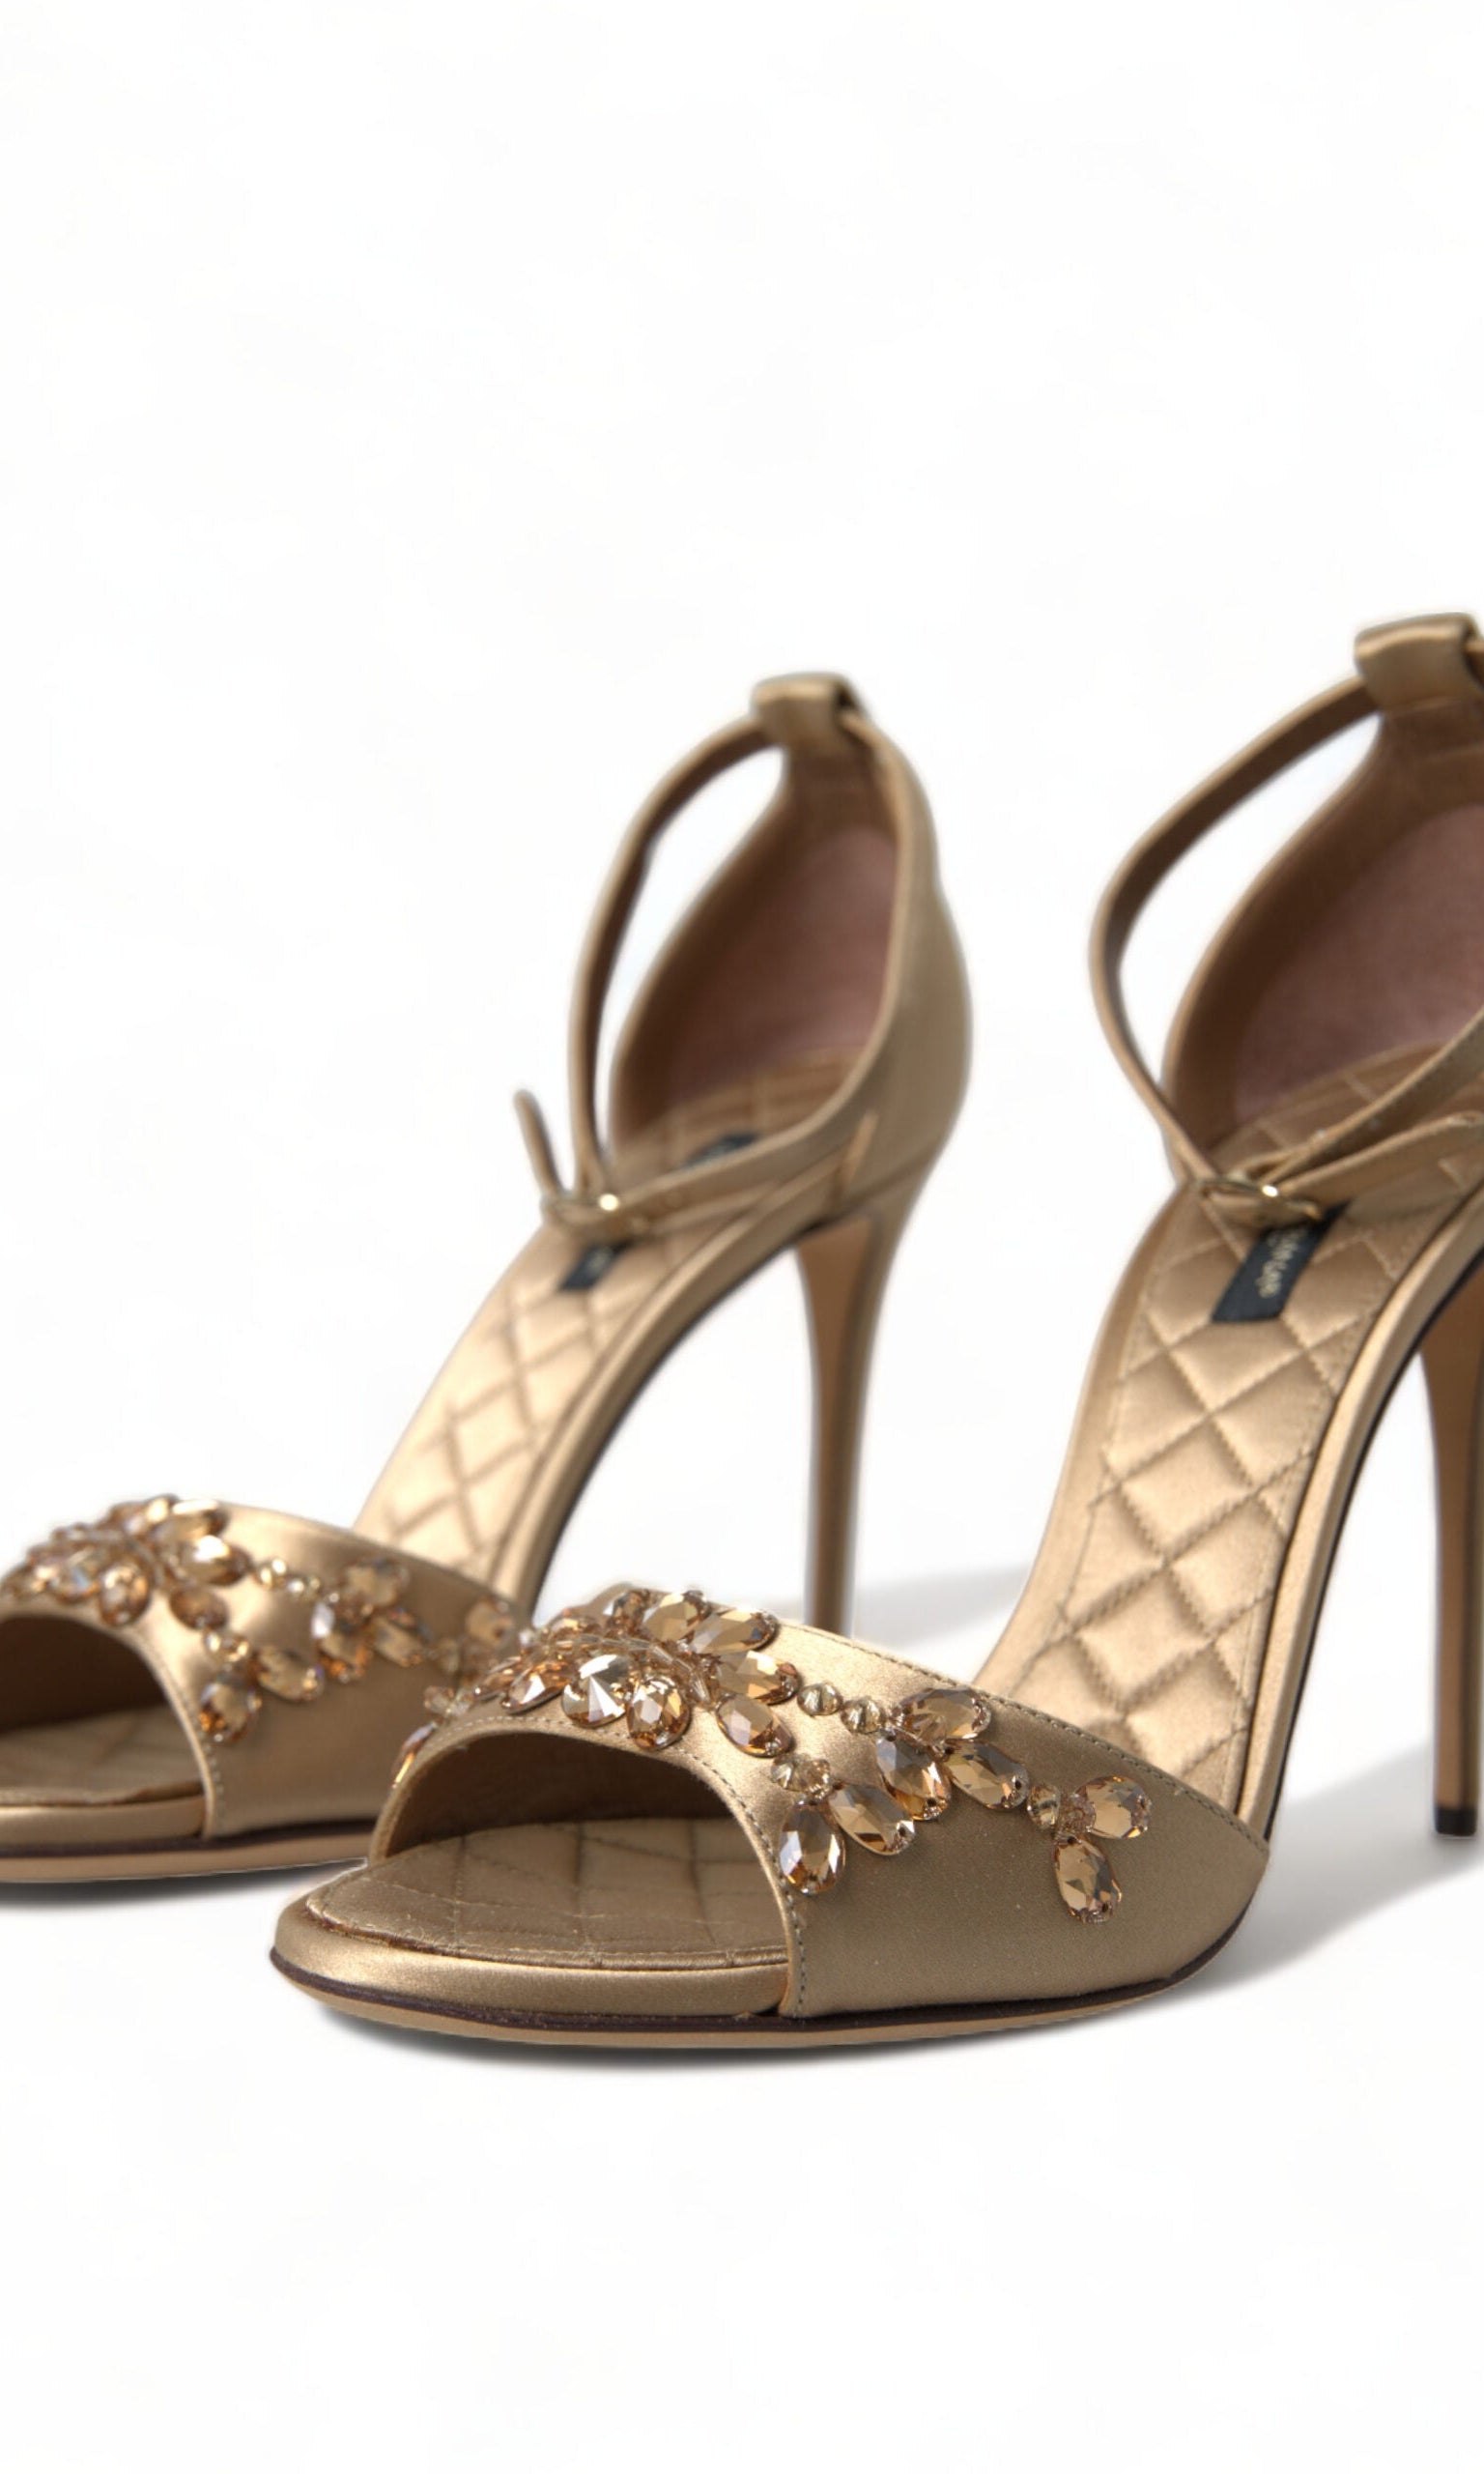 Dolce & Gabbana Gold Satin Ankle Strap Crystal Sandals Shoes GENUINE AUTHENTIC BRAND LLC